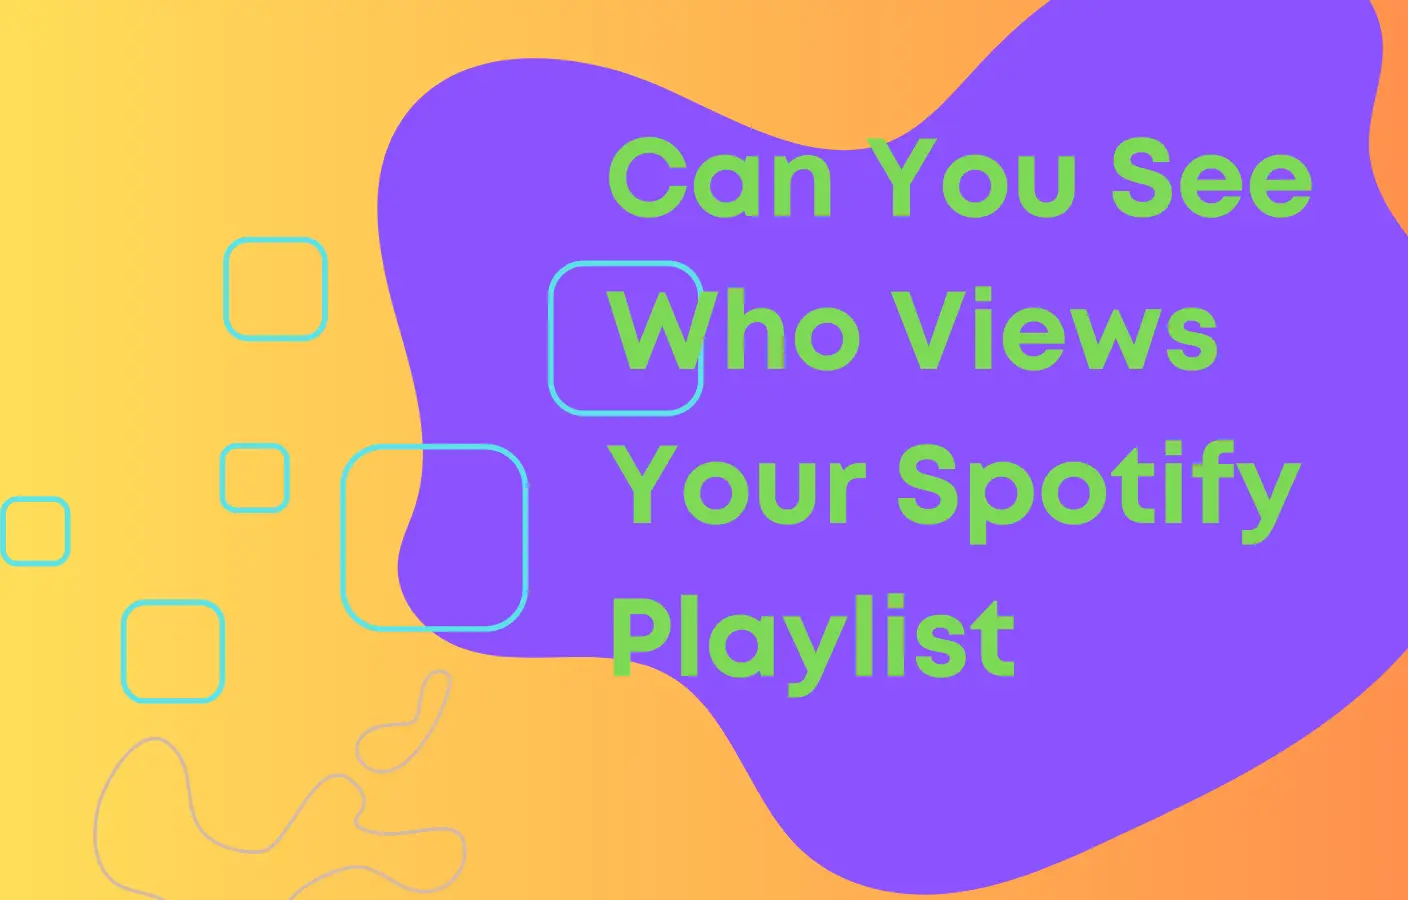 Can you see who viewed your playlists on Spotify